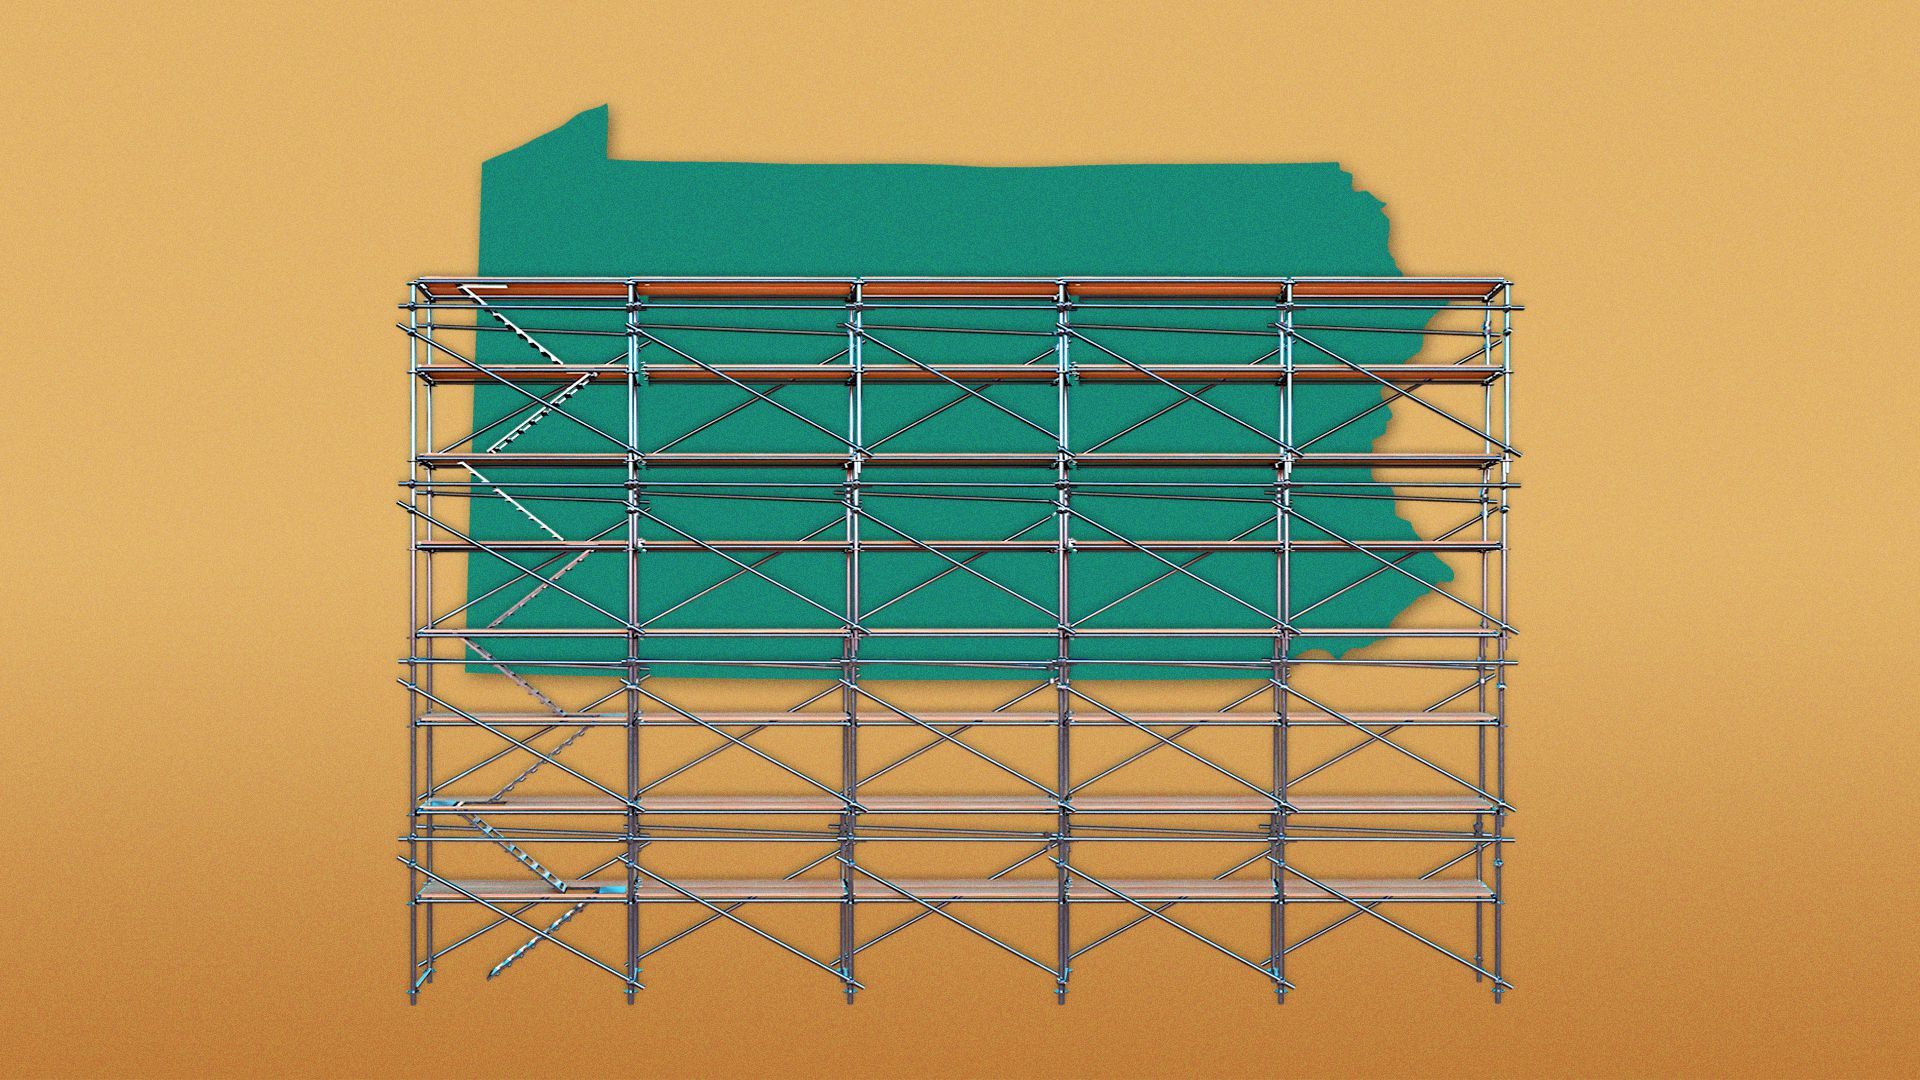 Illustration of the state of PA, with scaffolding.